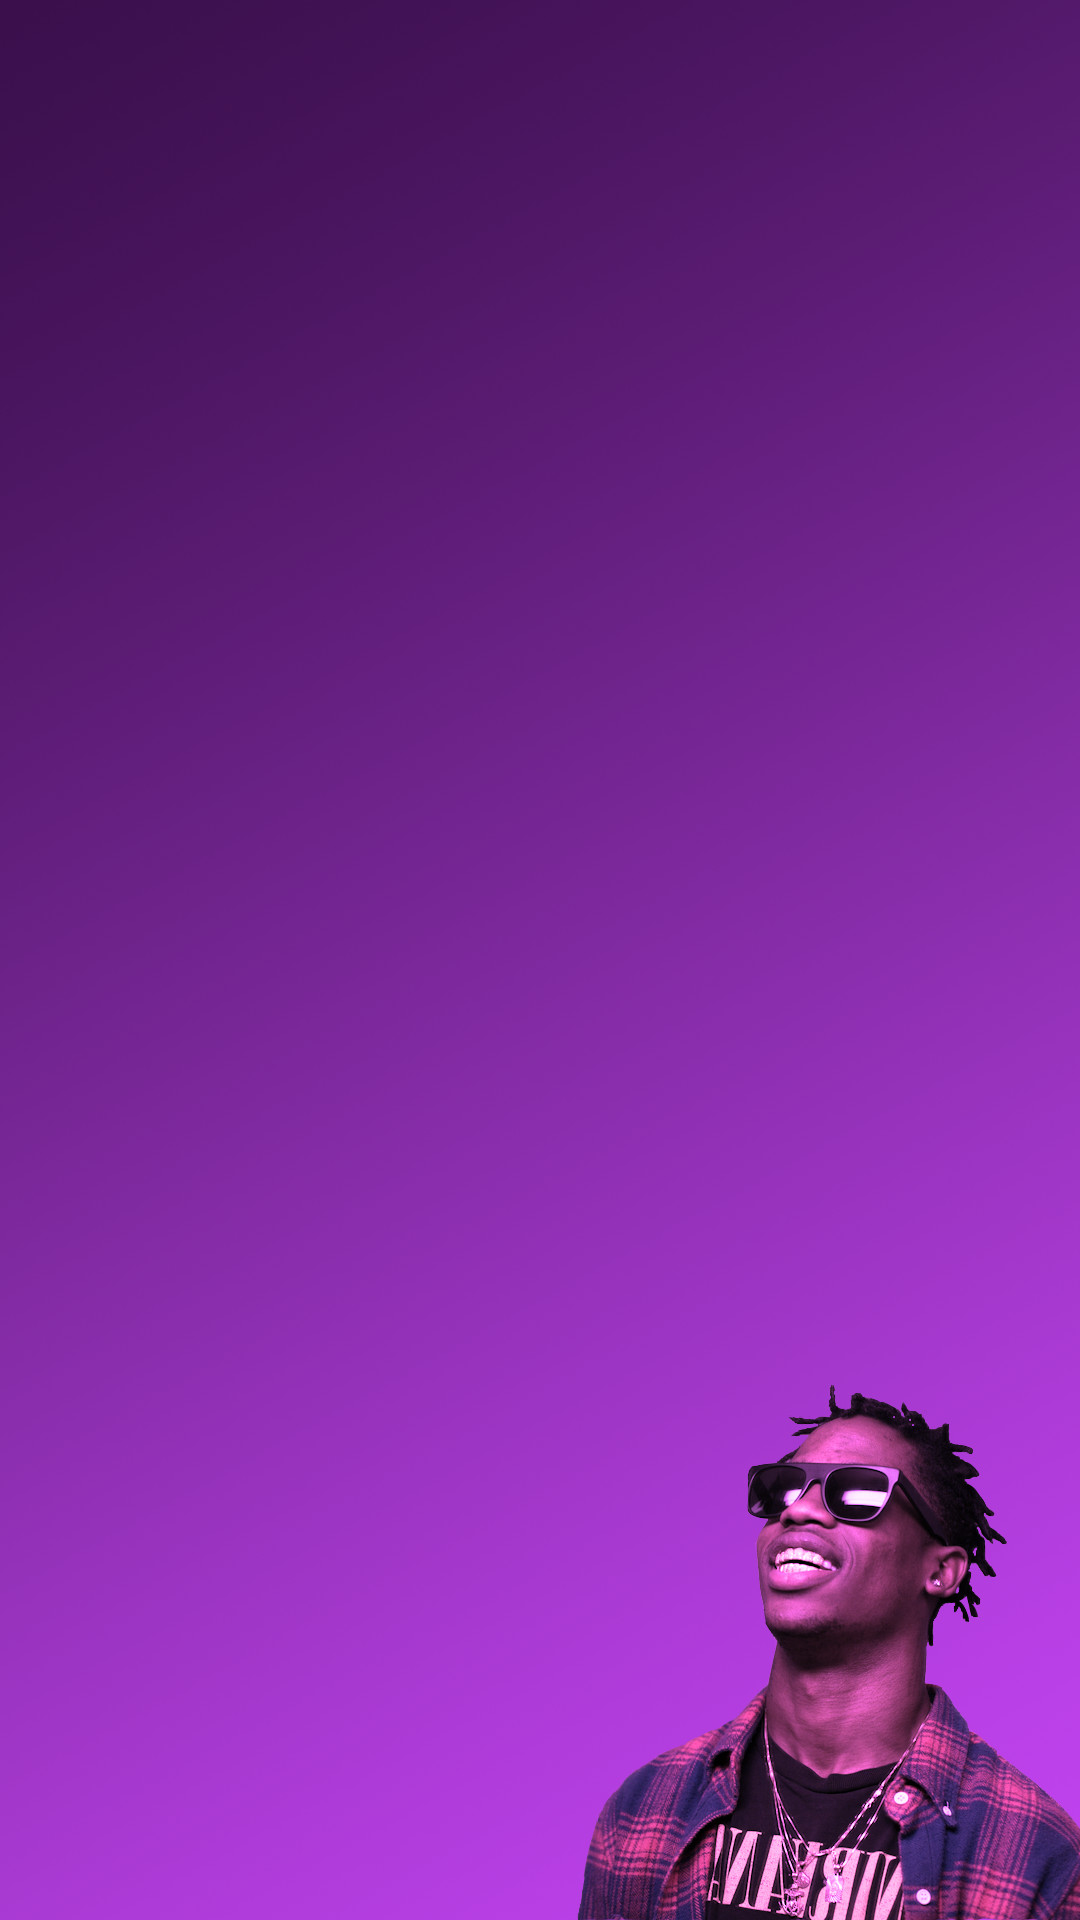 I made an iPhone wallpaper so that Travis can preview your notifications for you